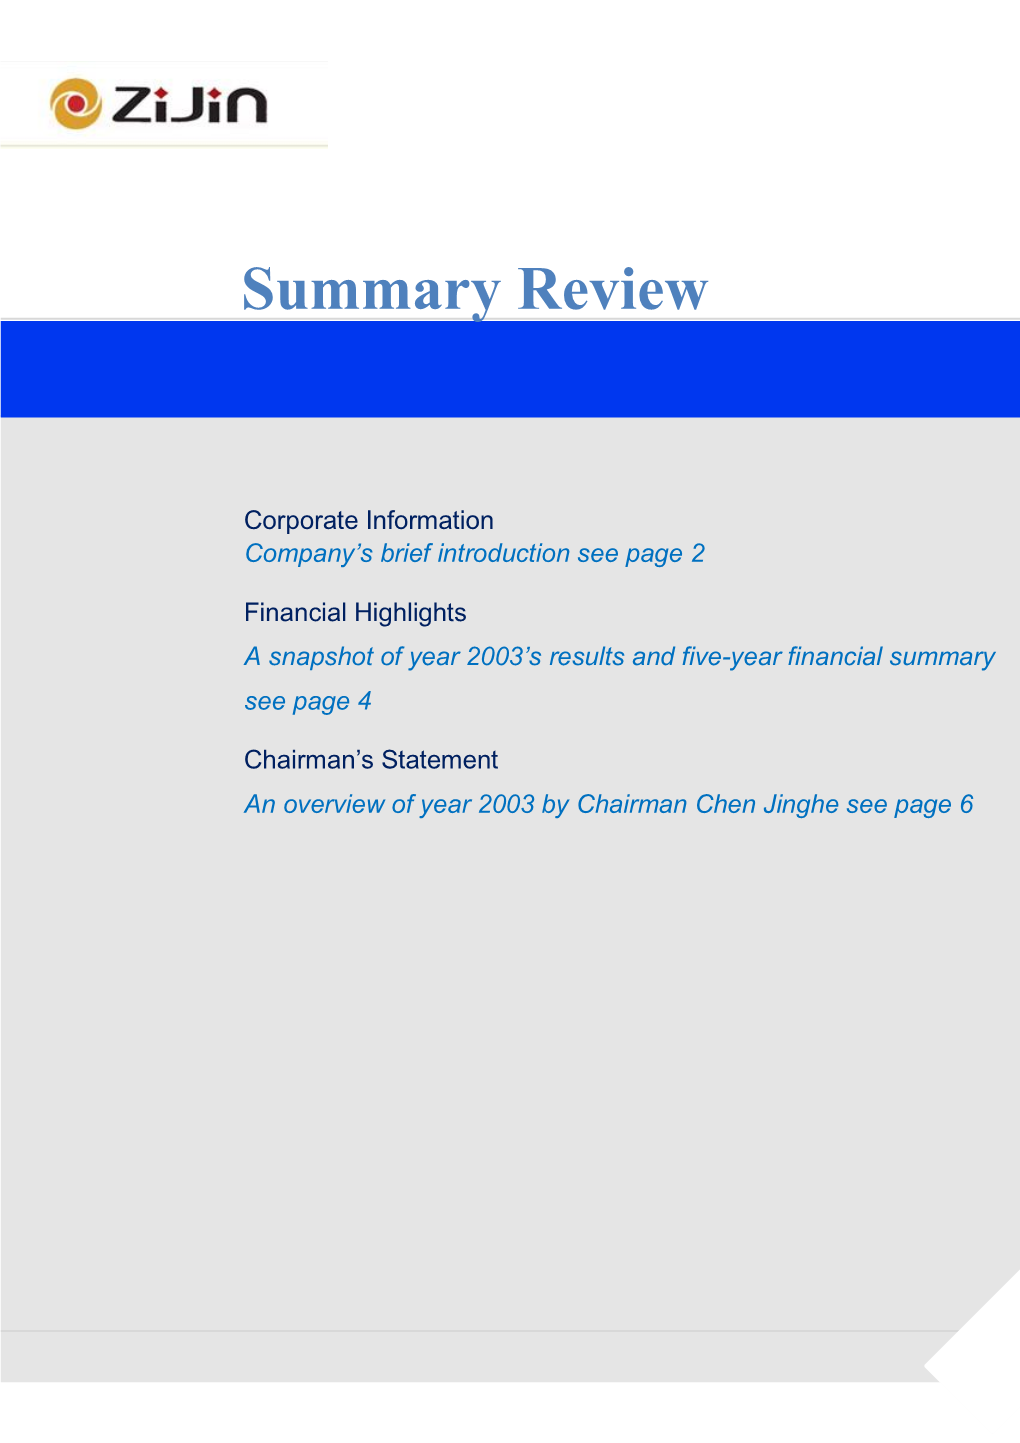 Summary Review